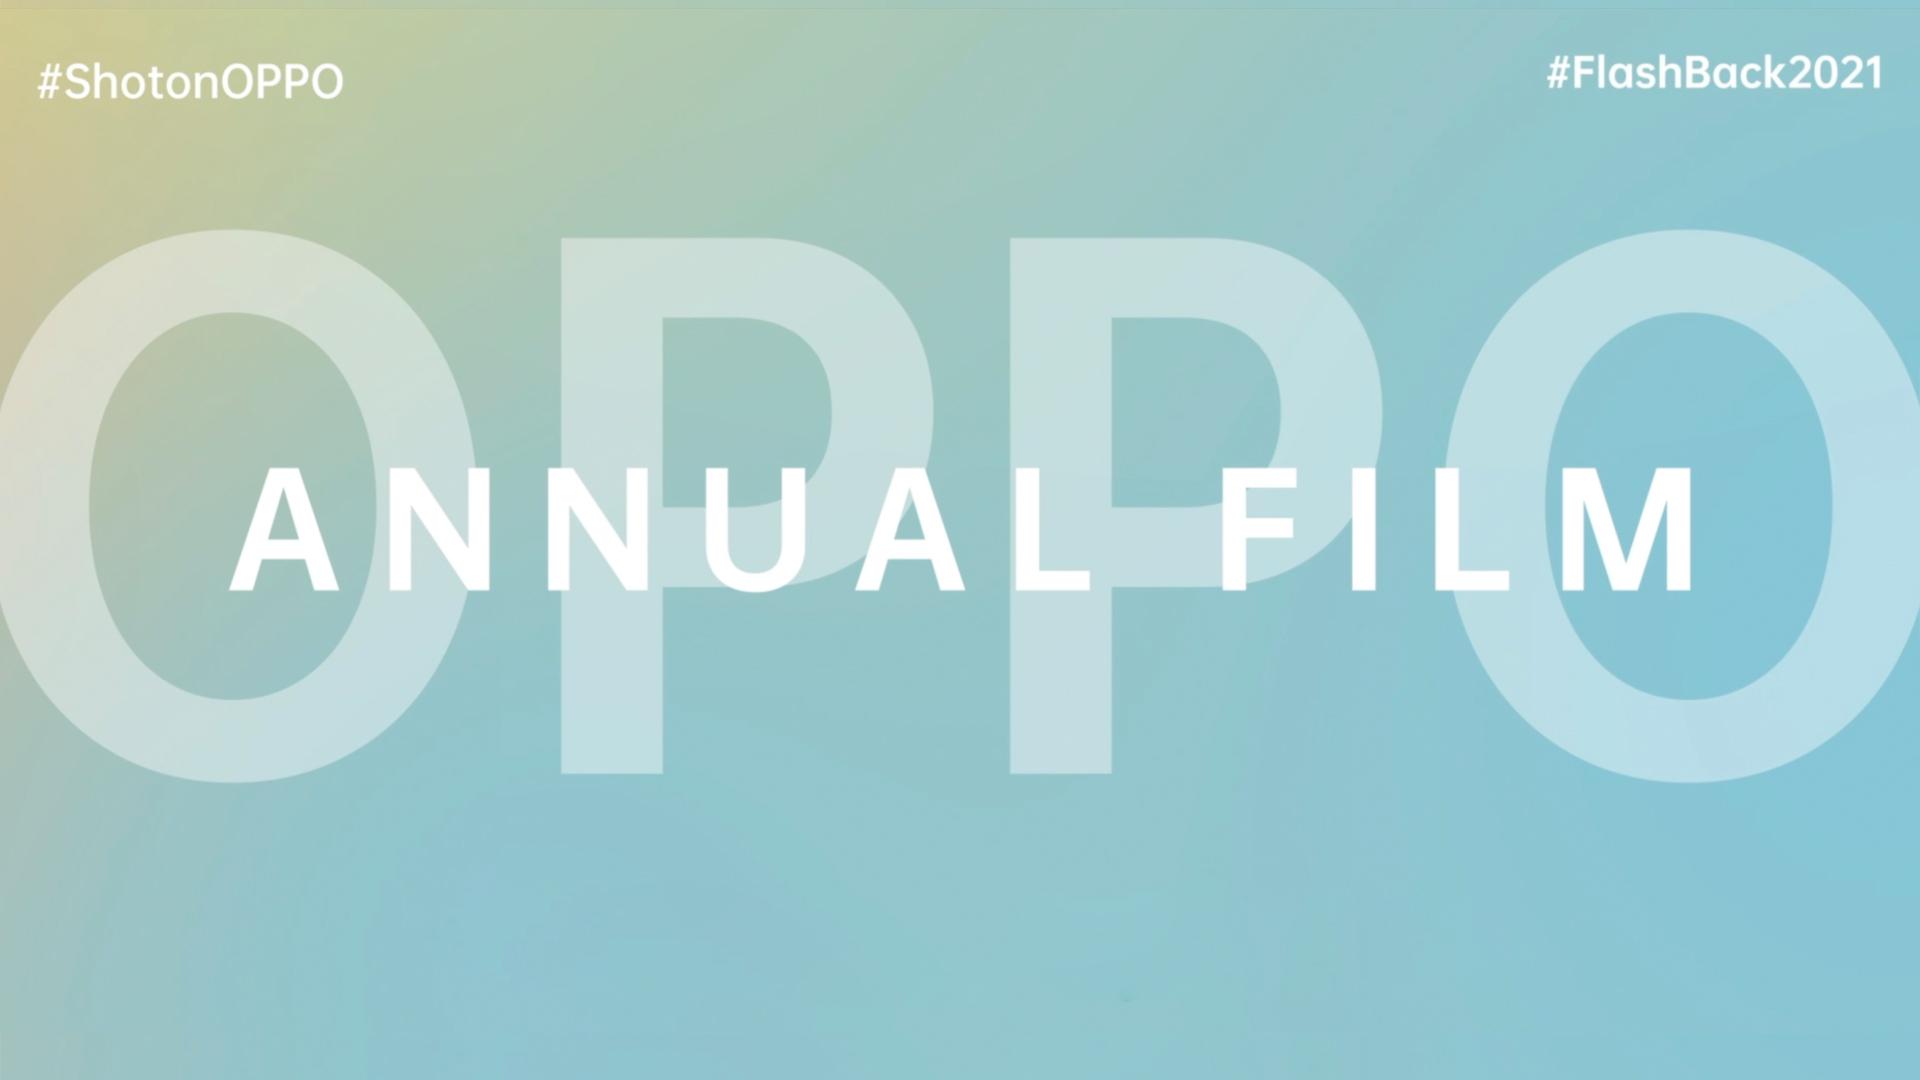 OPPO Annual Film Memorializes the Moments that Matter